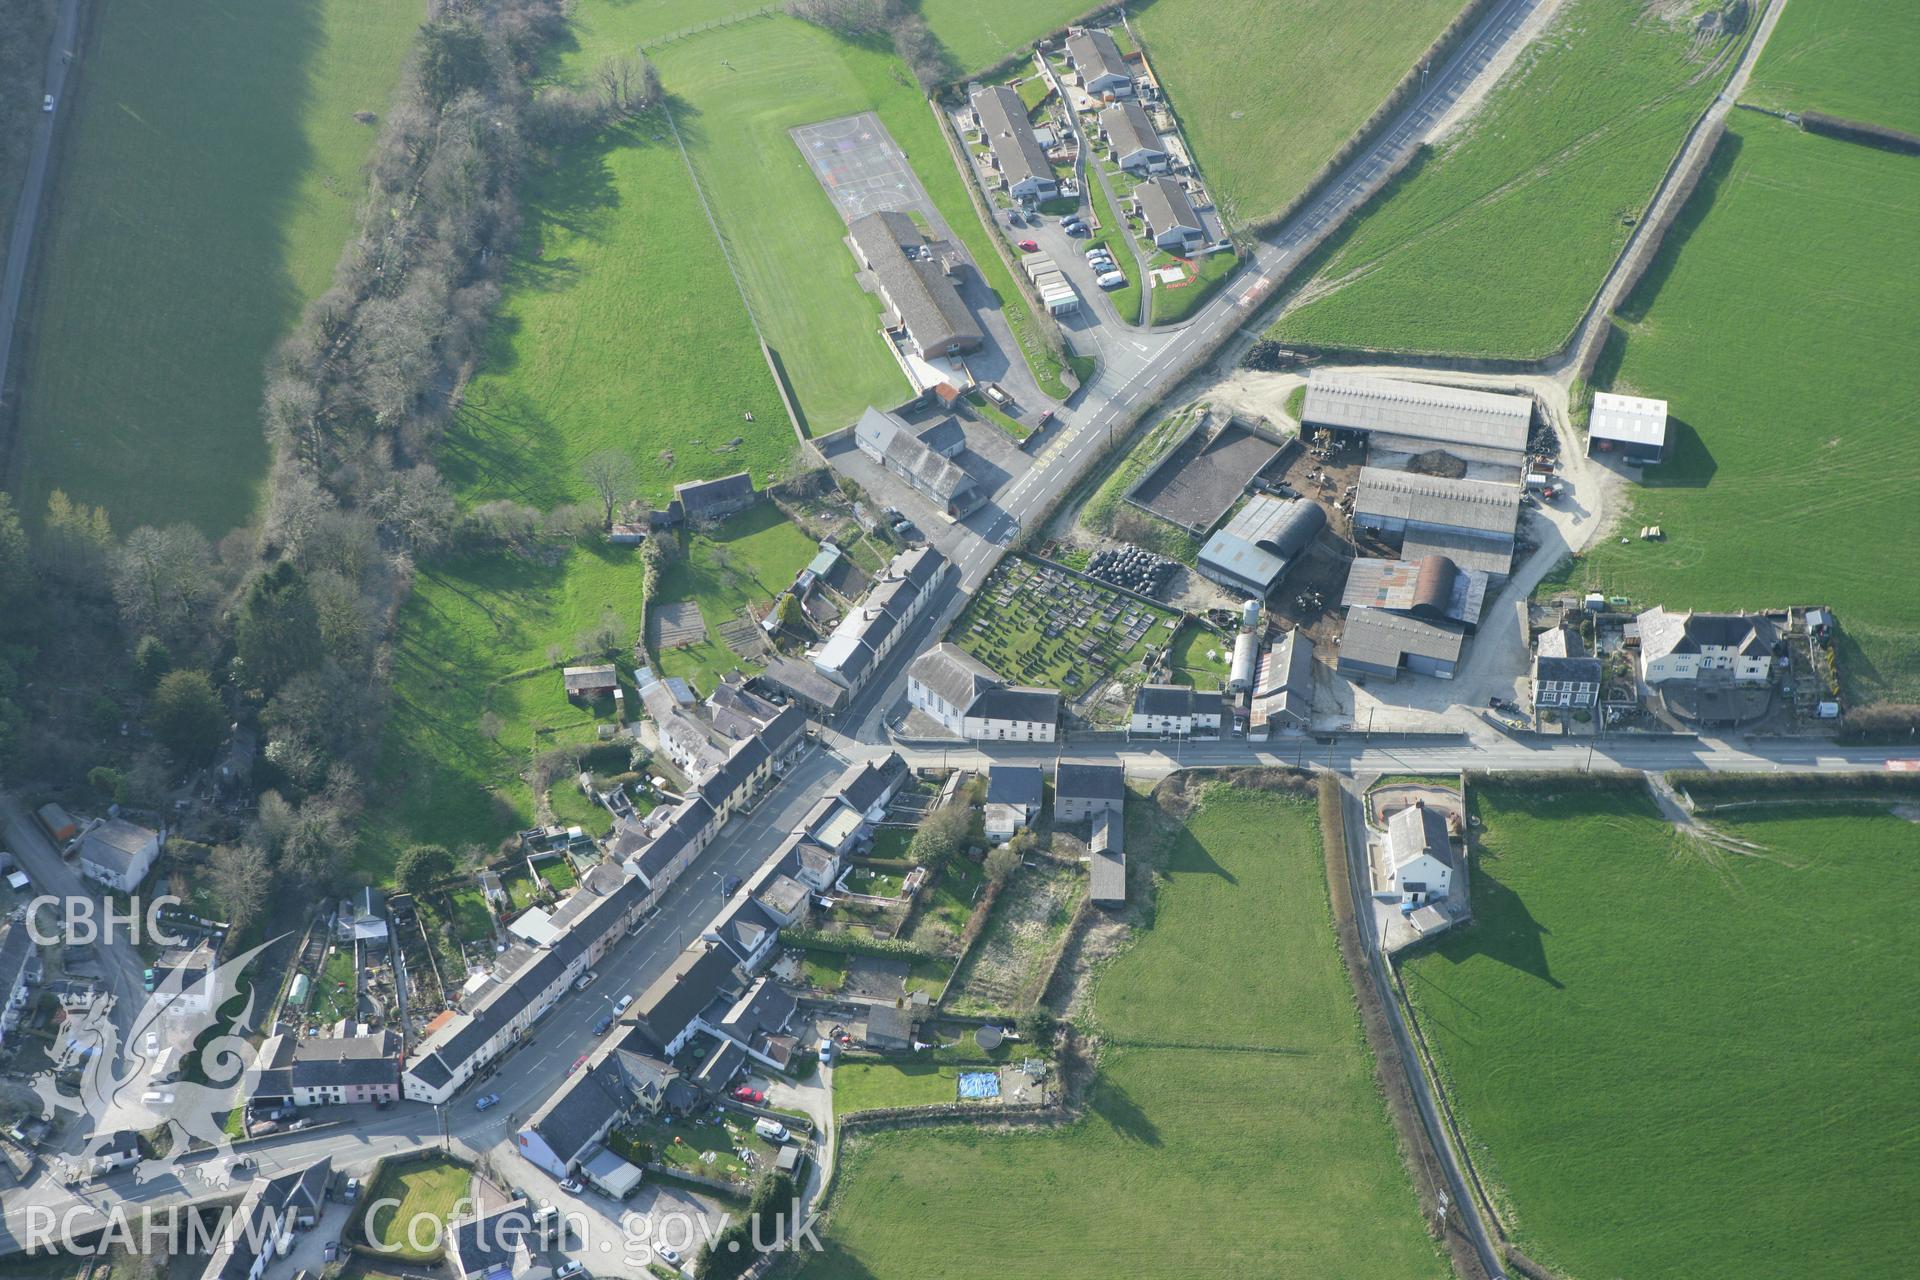 RCAHMW colour oblique aerial photograph of Cynwyl Elfed. Taken on 13 April 2010 by Toby Driver